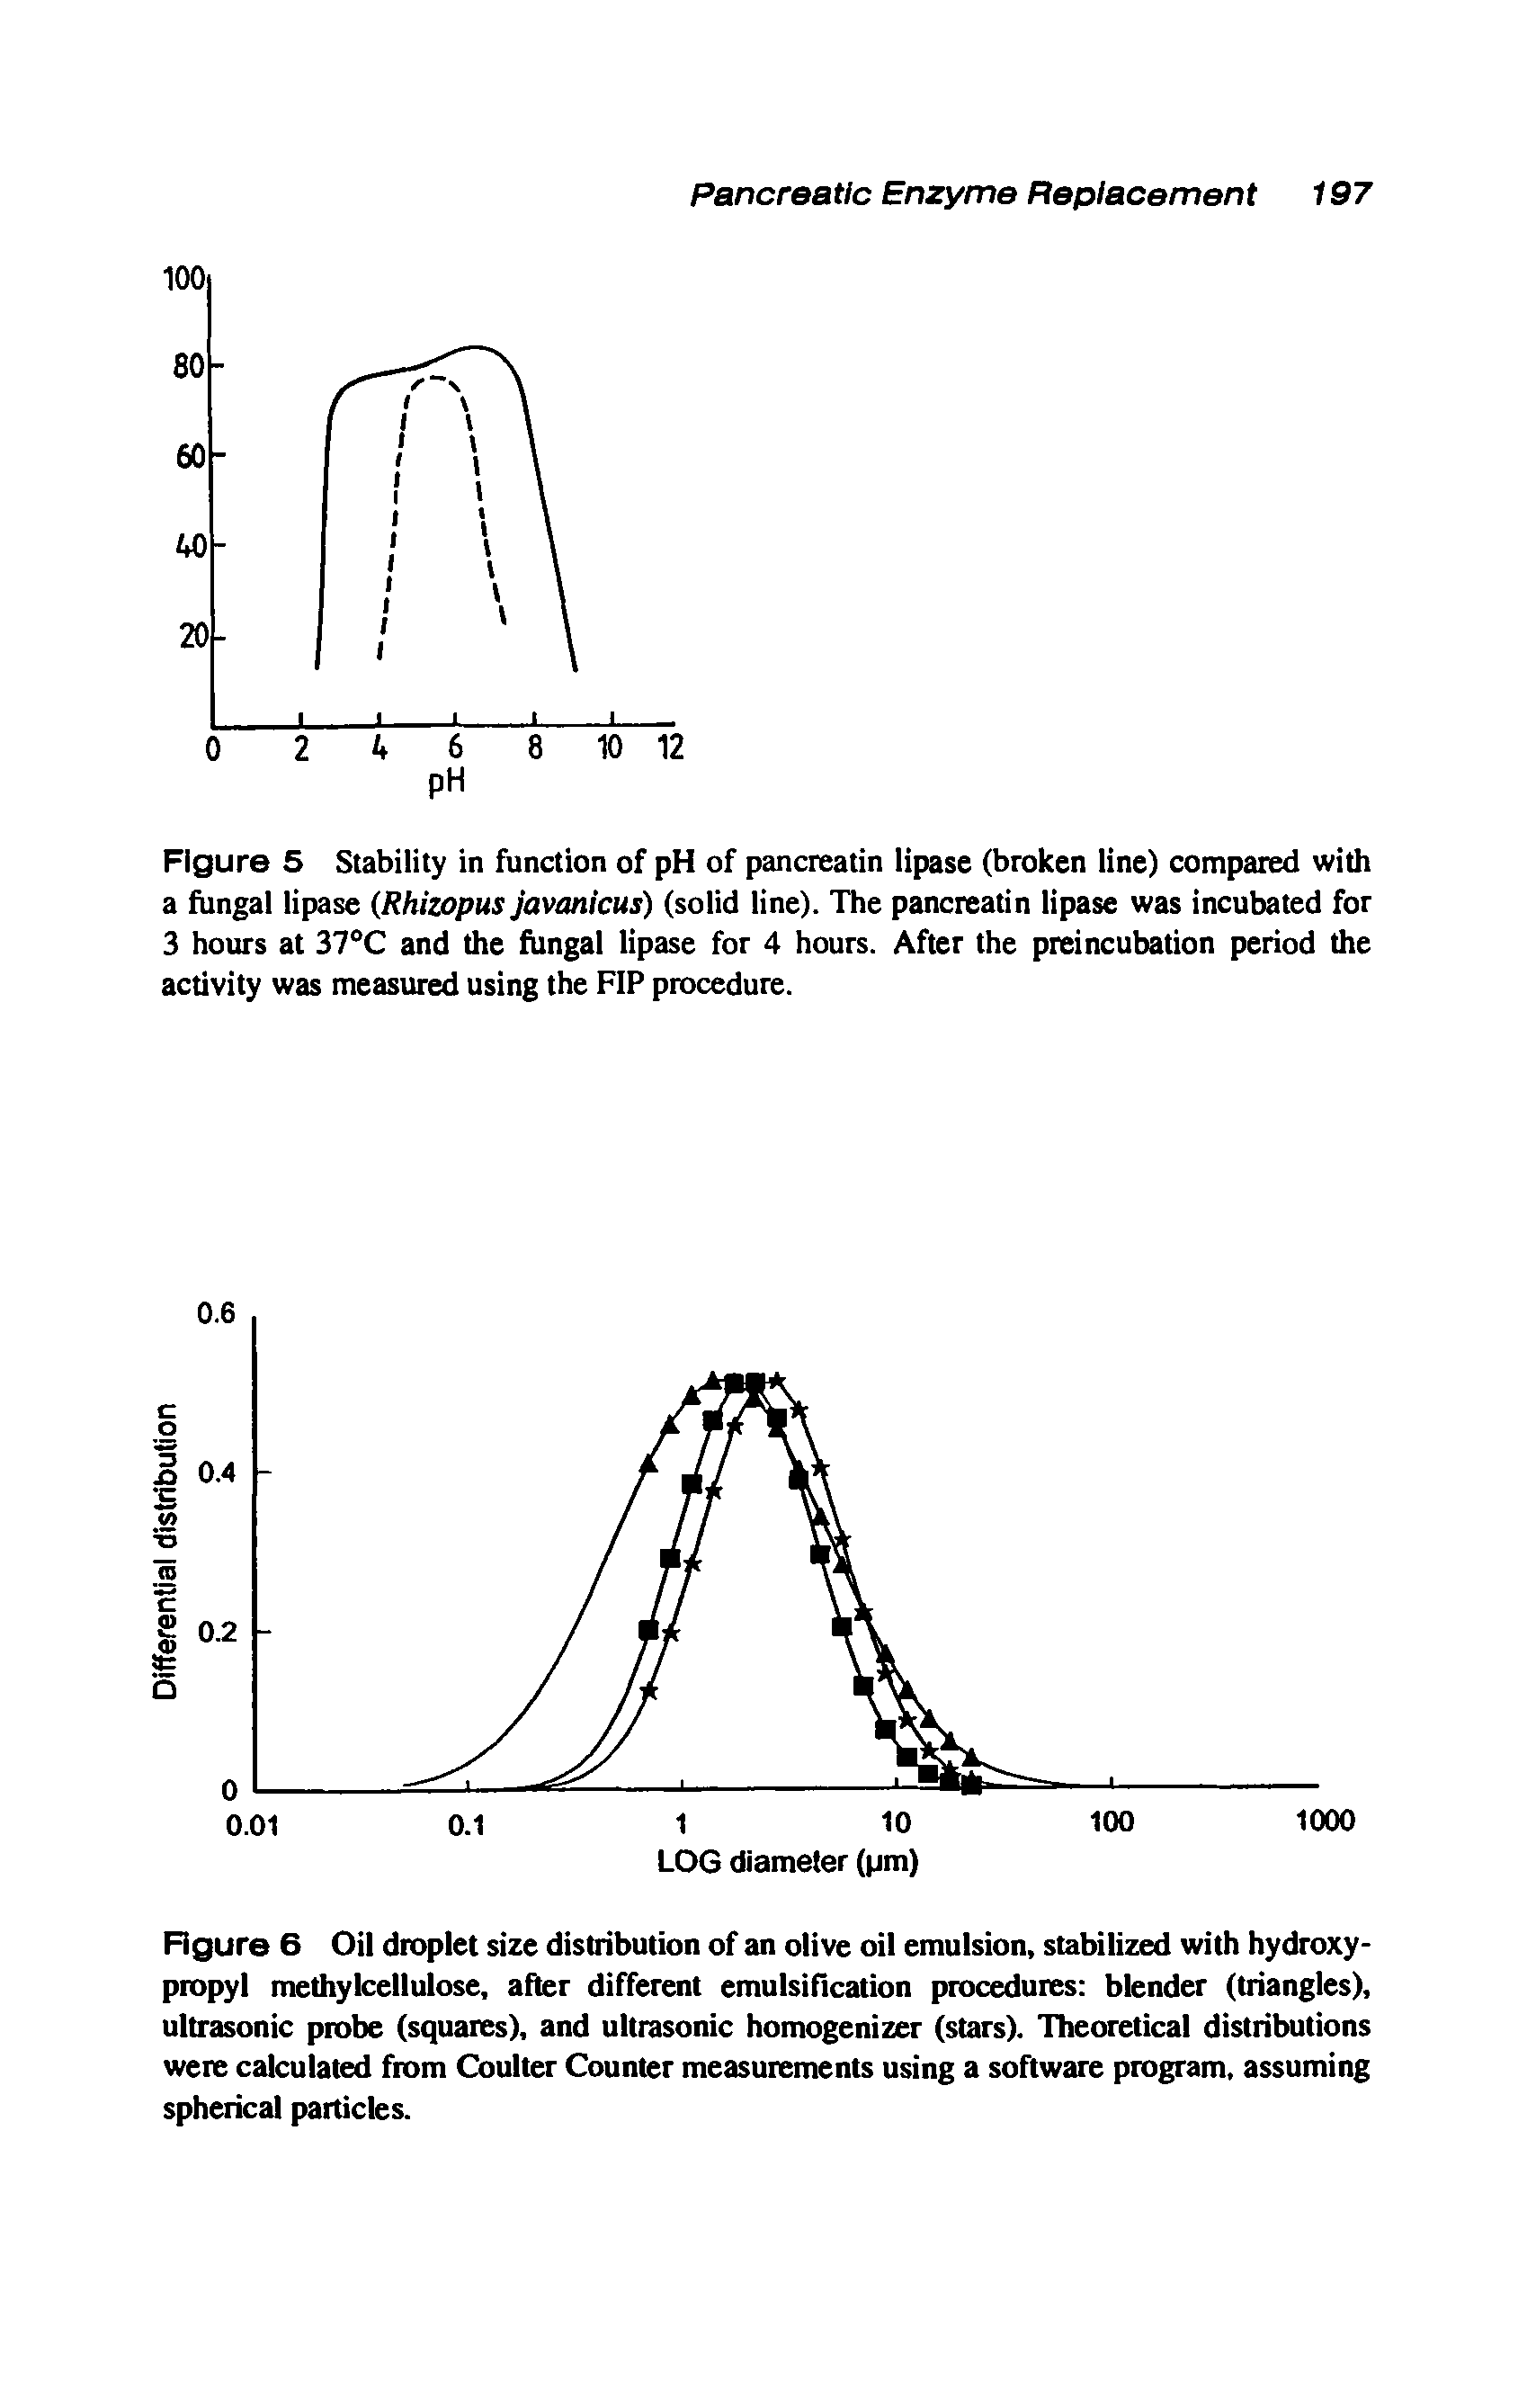 Figure 5 Stability in function of pH of pancreatin lipase (broken line) compared with a fungal lipase (Rhizopus javanicus) (solid line). The pancreatin lipase was incubated for 3 hours at 37°C and the fungal lipase for 4 hours. After the preincubation period the activity was measured using the FIP procedure.